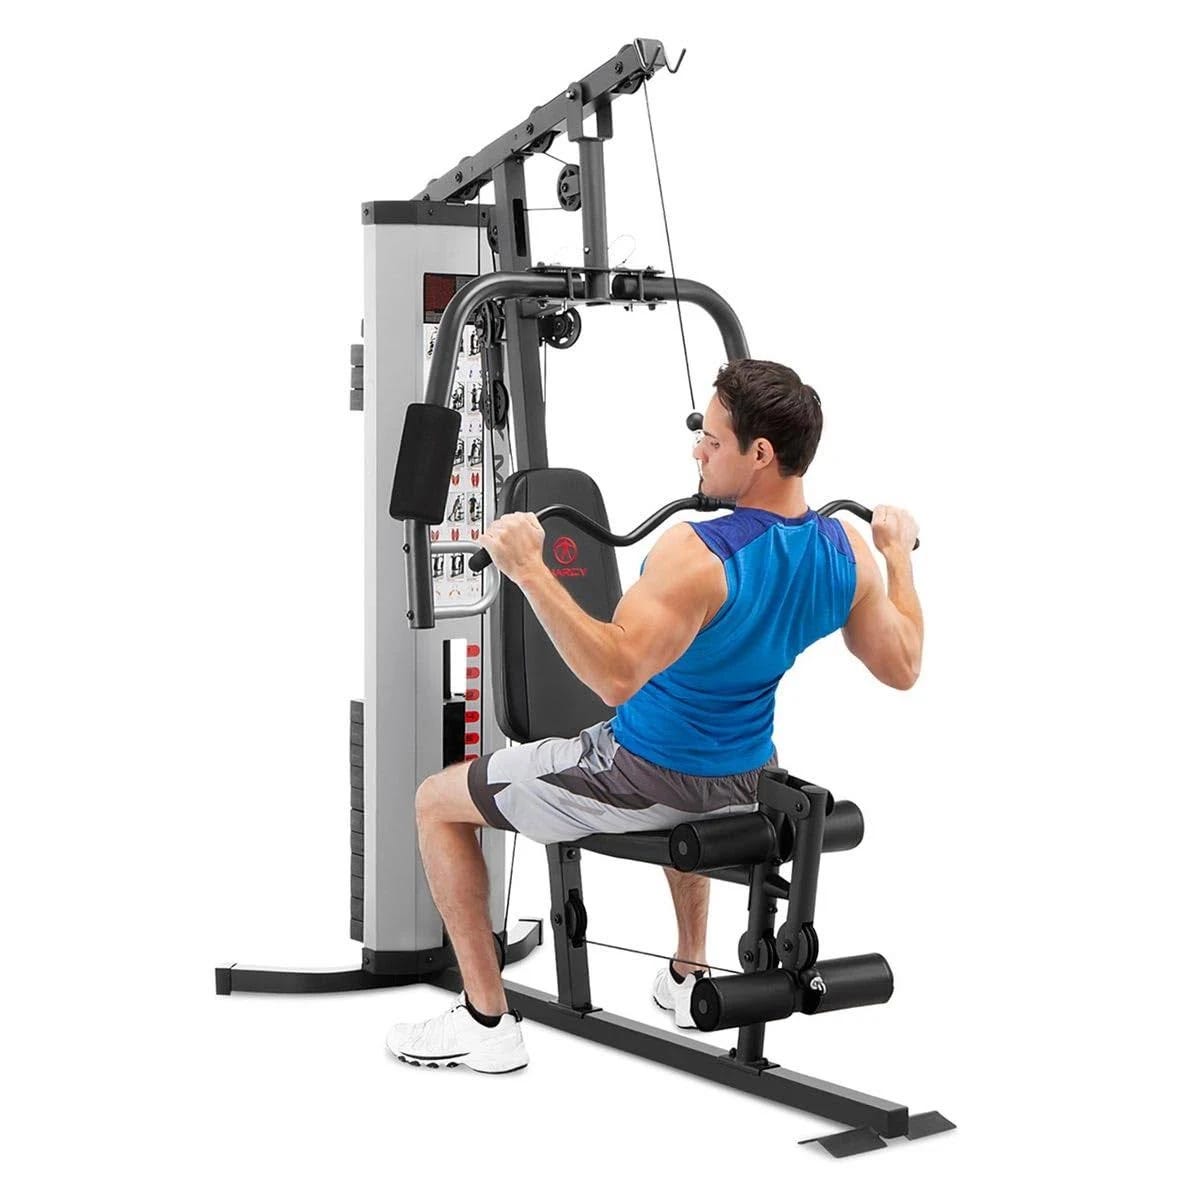 Marcy MWM-988 Multifunction Home Gym with Vinyl Coat and Dual Press Arm | Image